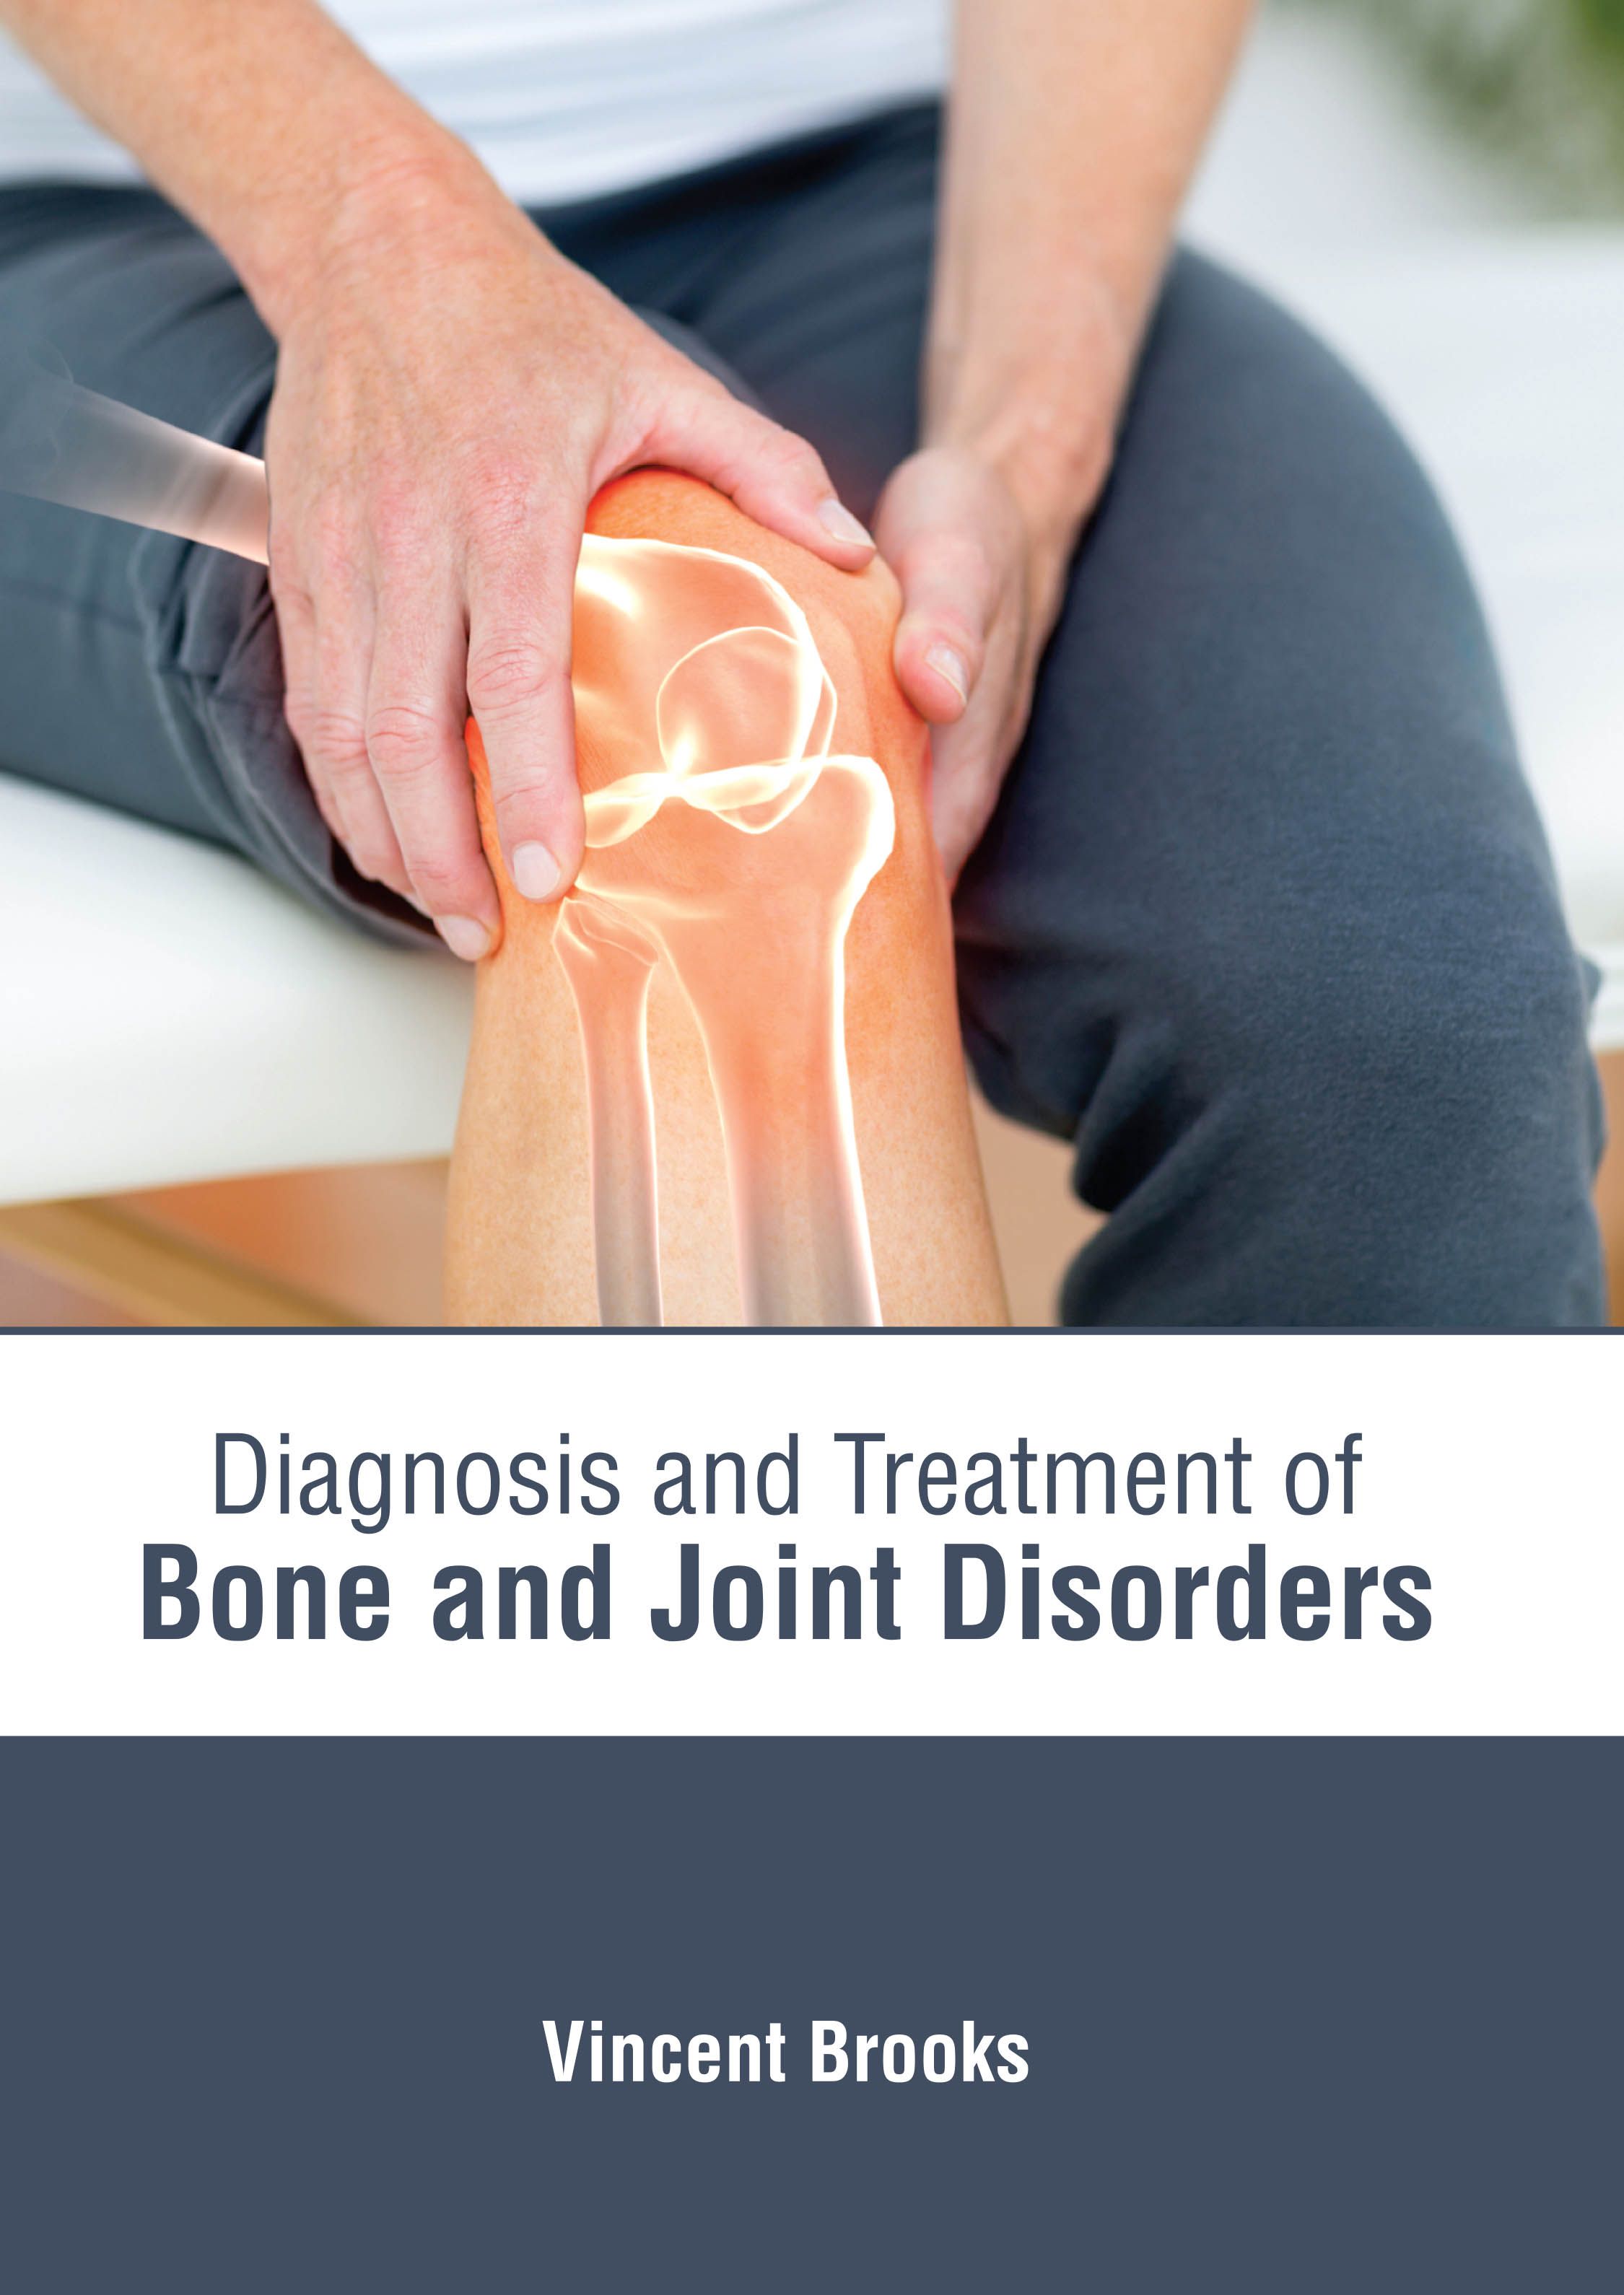 DIAGNOSIS AND TREATMENT OF BONE AND JOINT DISORDERS- ISBN: 9781639273935